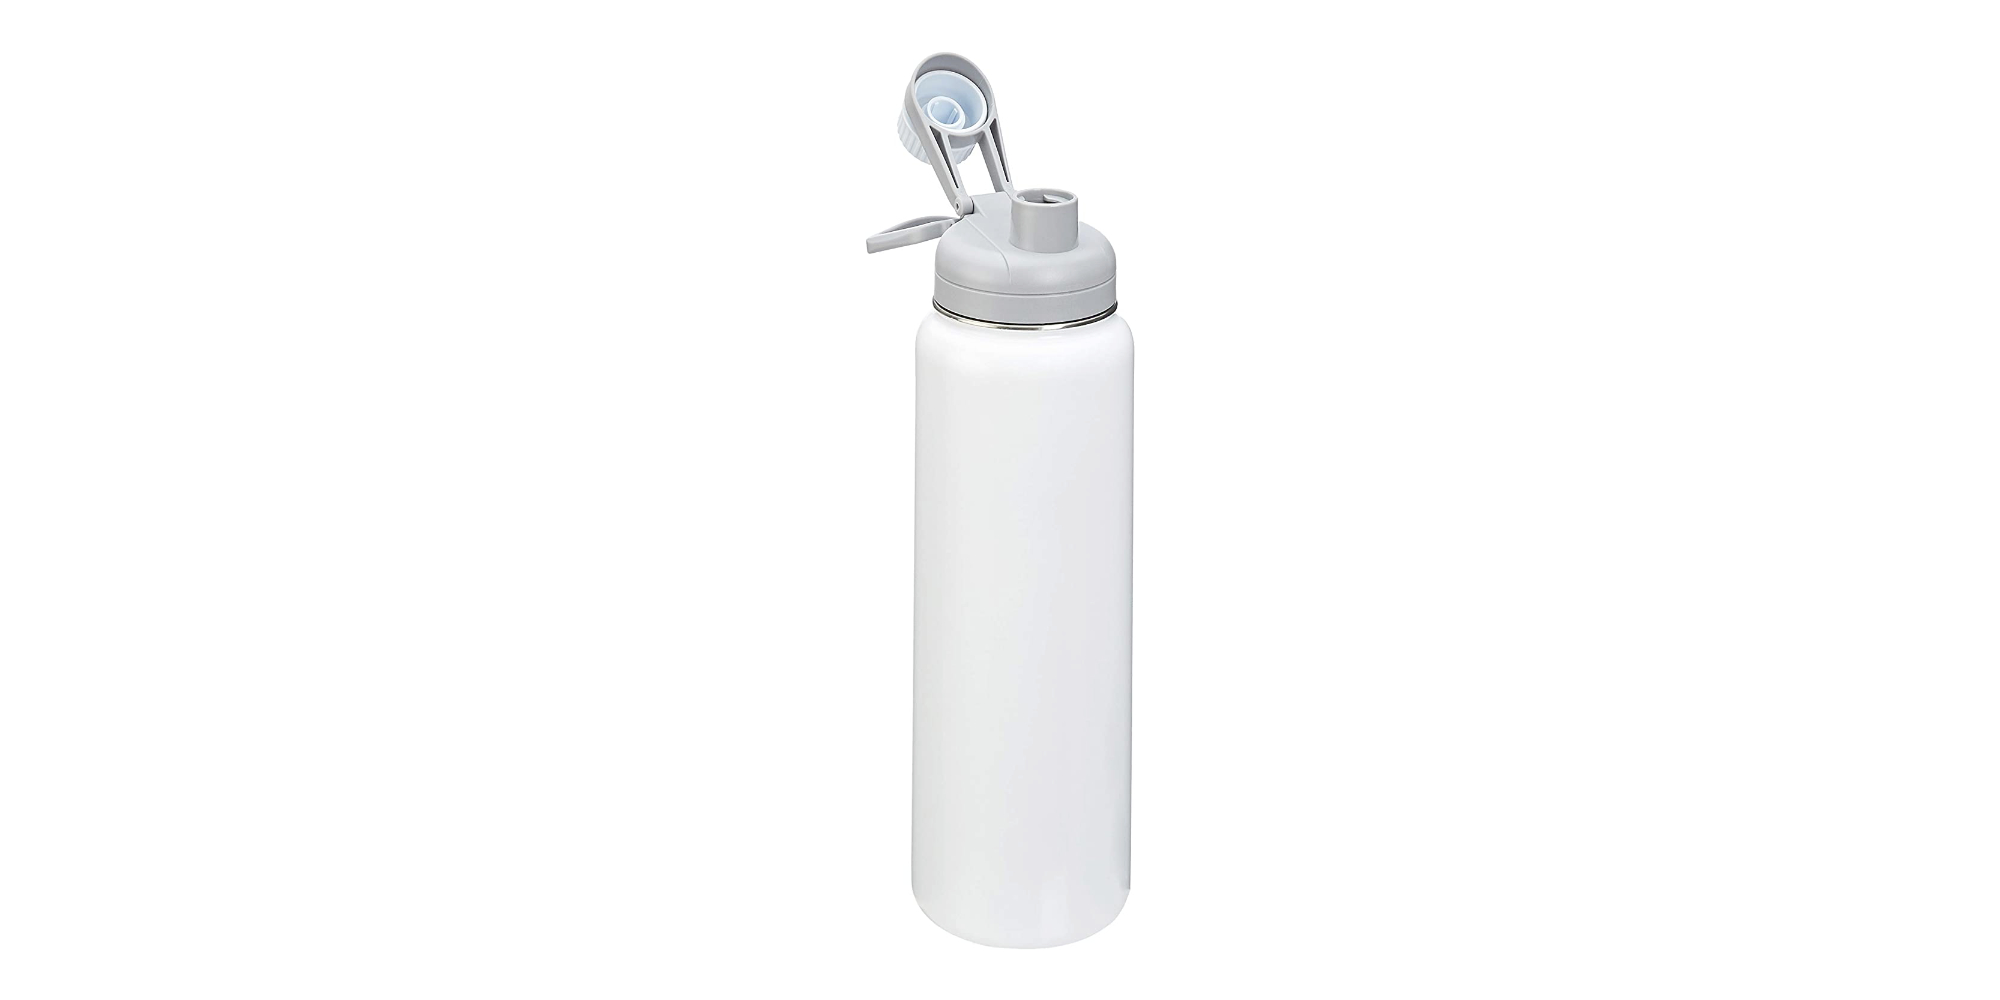 https://9to5toys.com/wp-content/uploads/sites/5/2021/04/Amazon-Basics-Stainless-Steel-Insulated-Water-Bottle.jpg